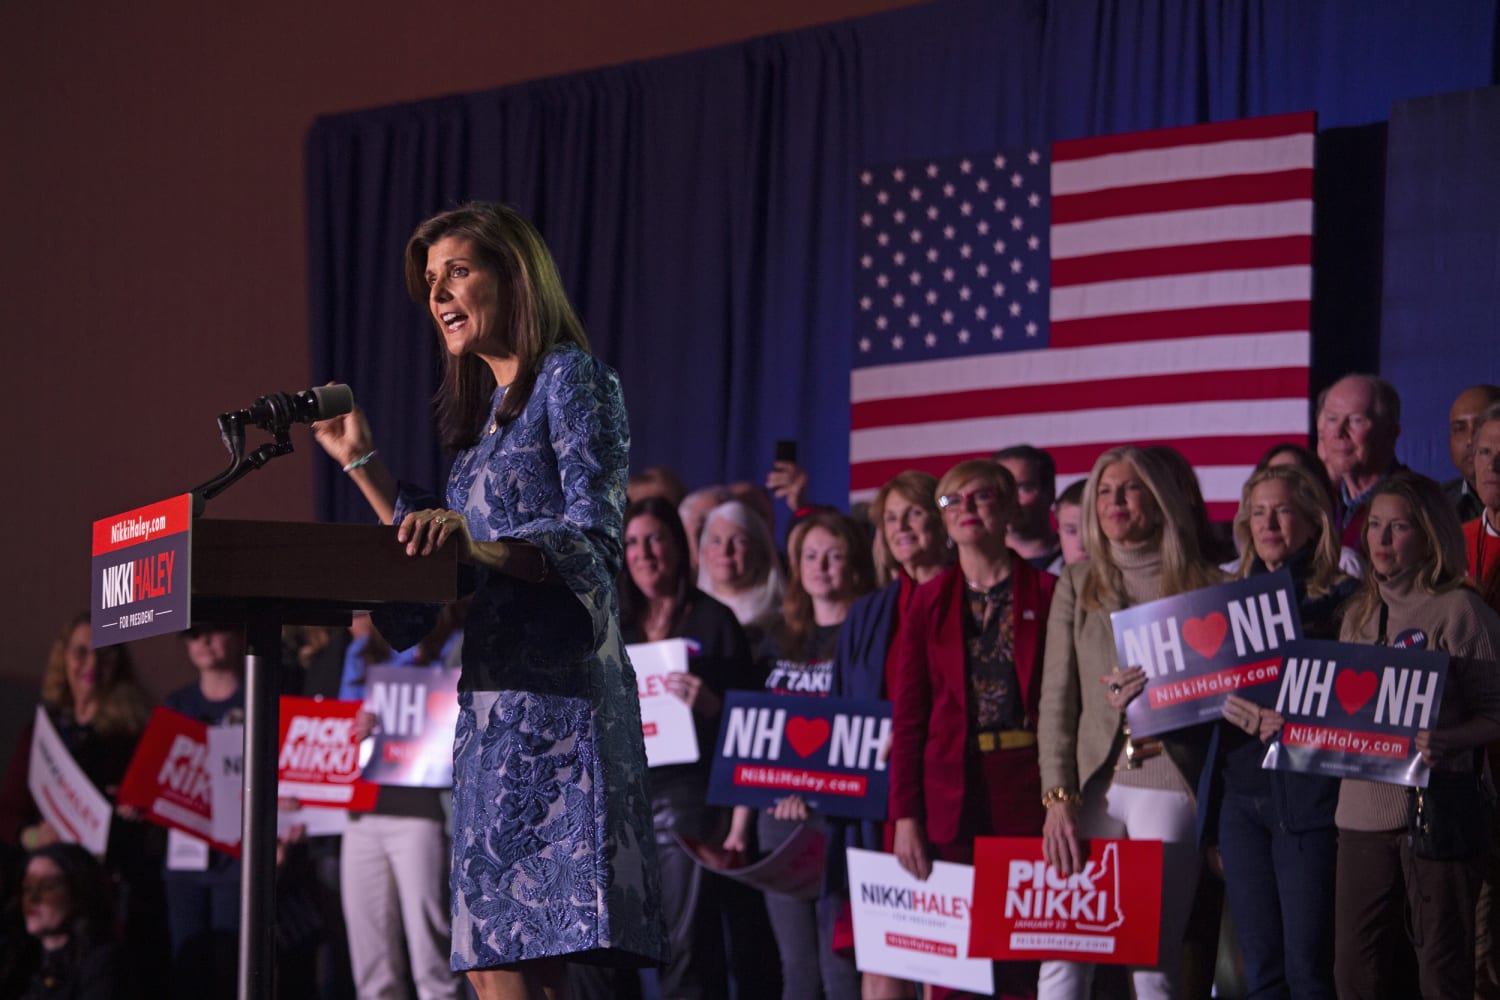 Nikki Haley's Supporters Urge Her to Stay Strong Against Donald Trump